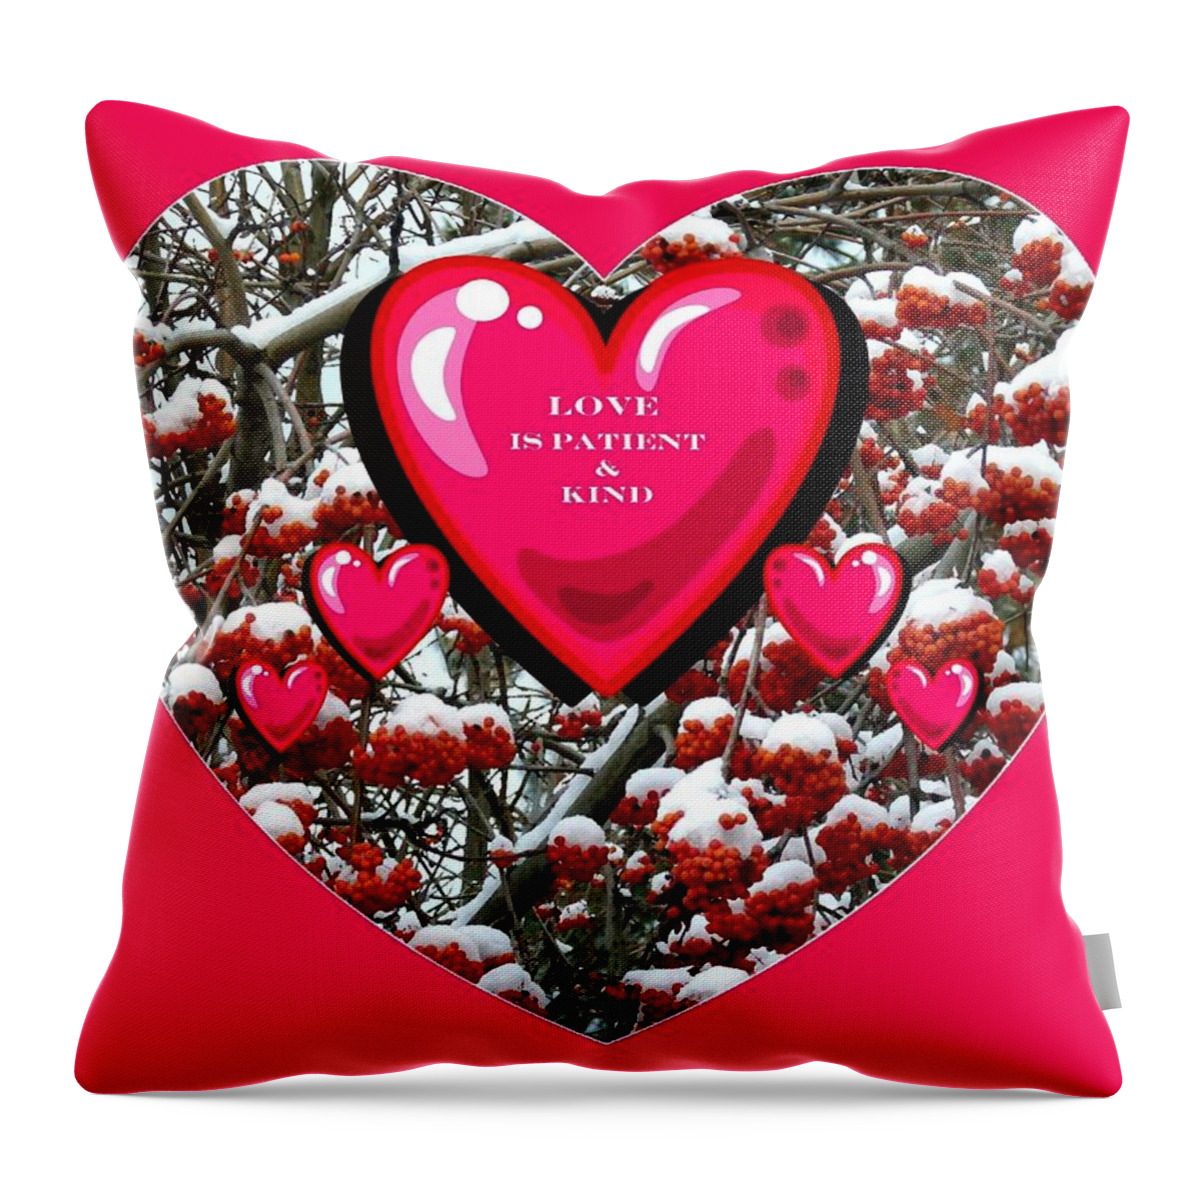 #loveispatientandkind Throw Pillow featuring the digital art Love Is Patient And Kind by Will Borden